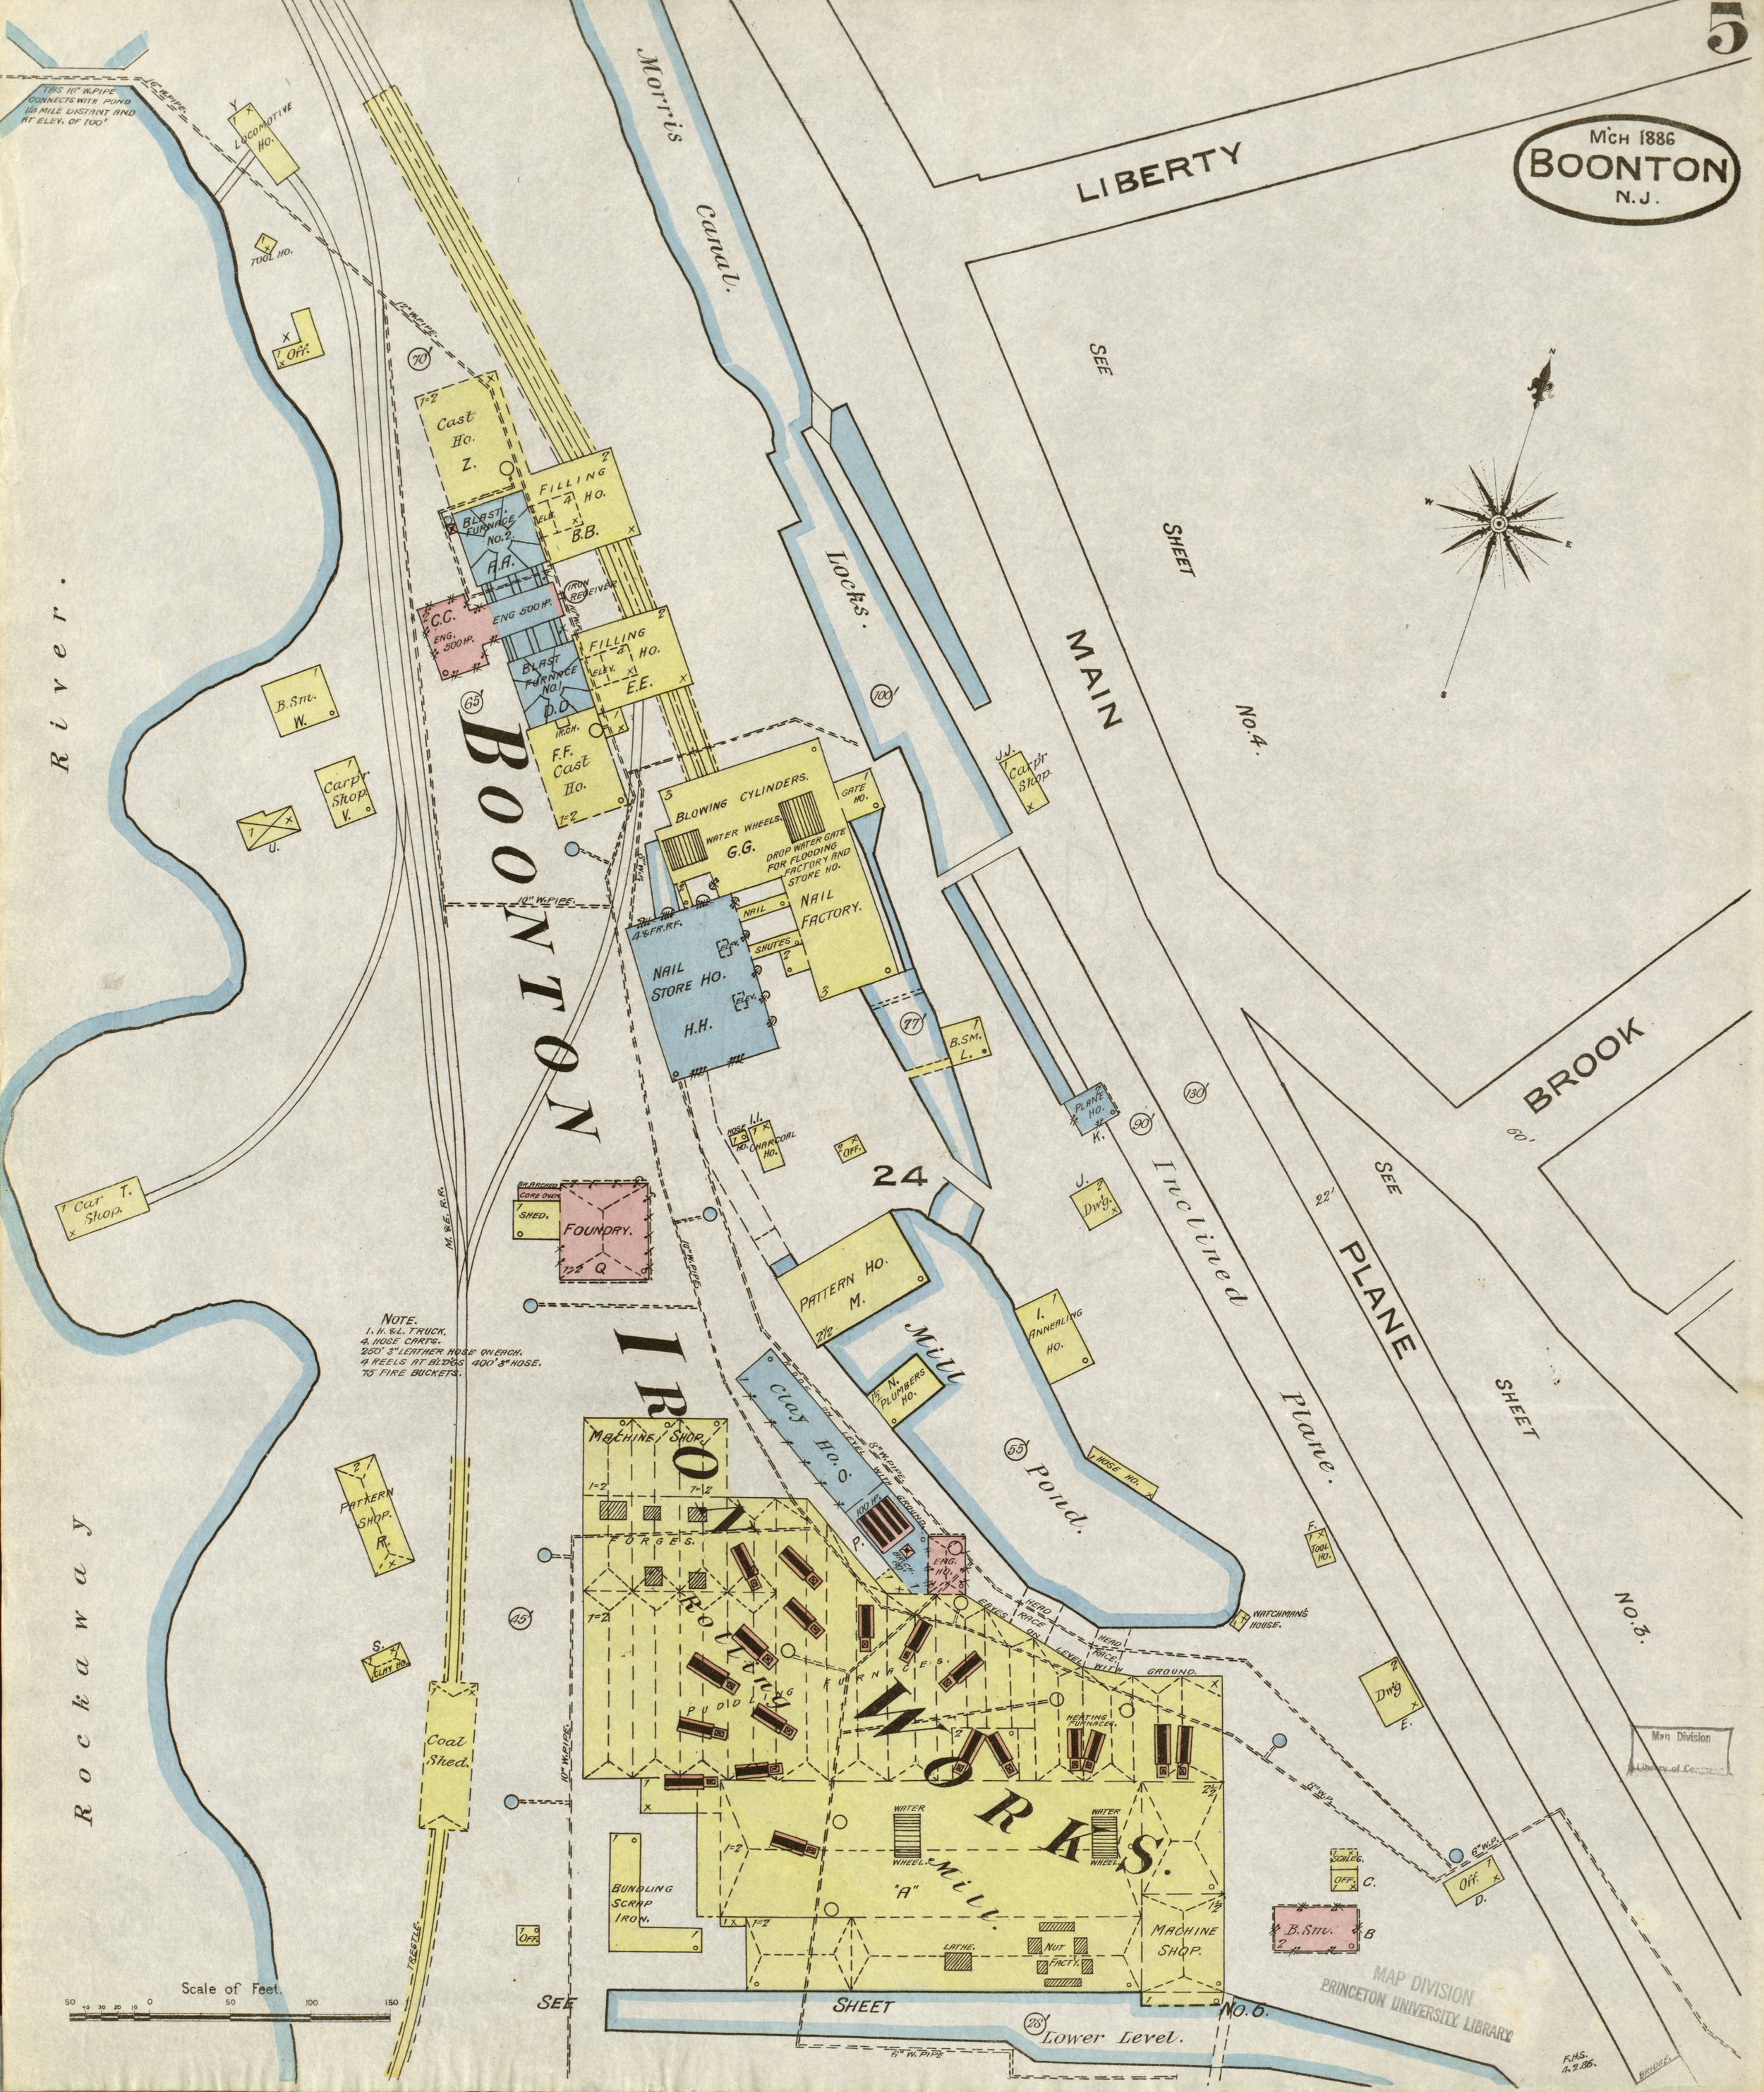 Sanborn Fire Insurance Map of the Boonton Ironworks in 1886